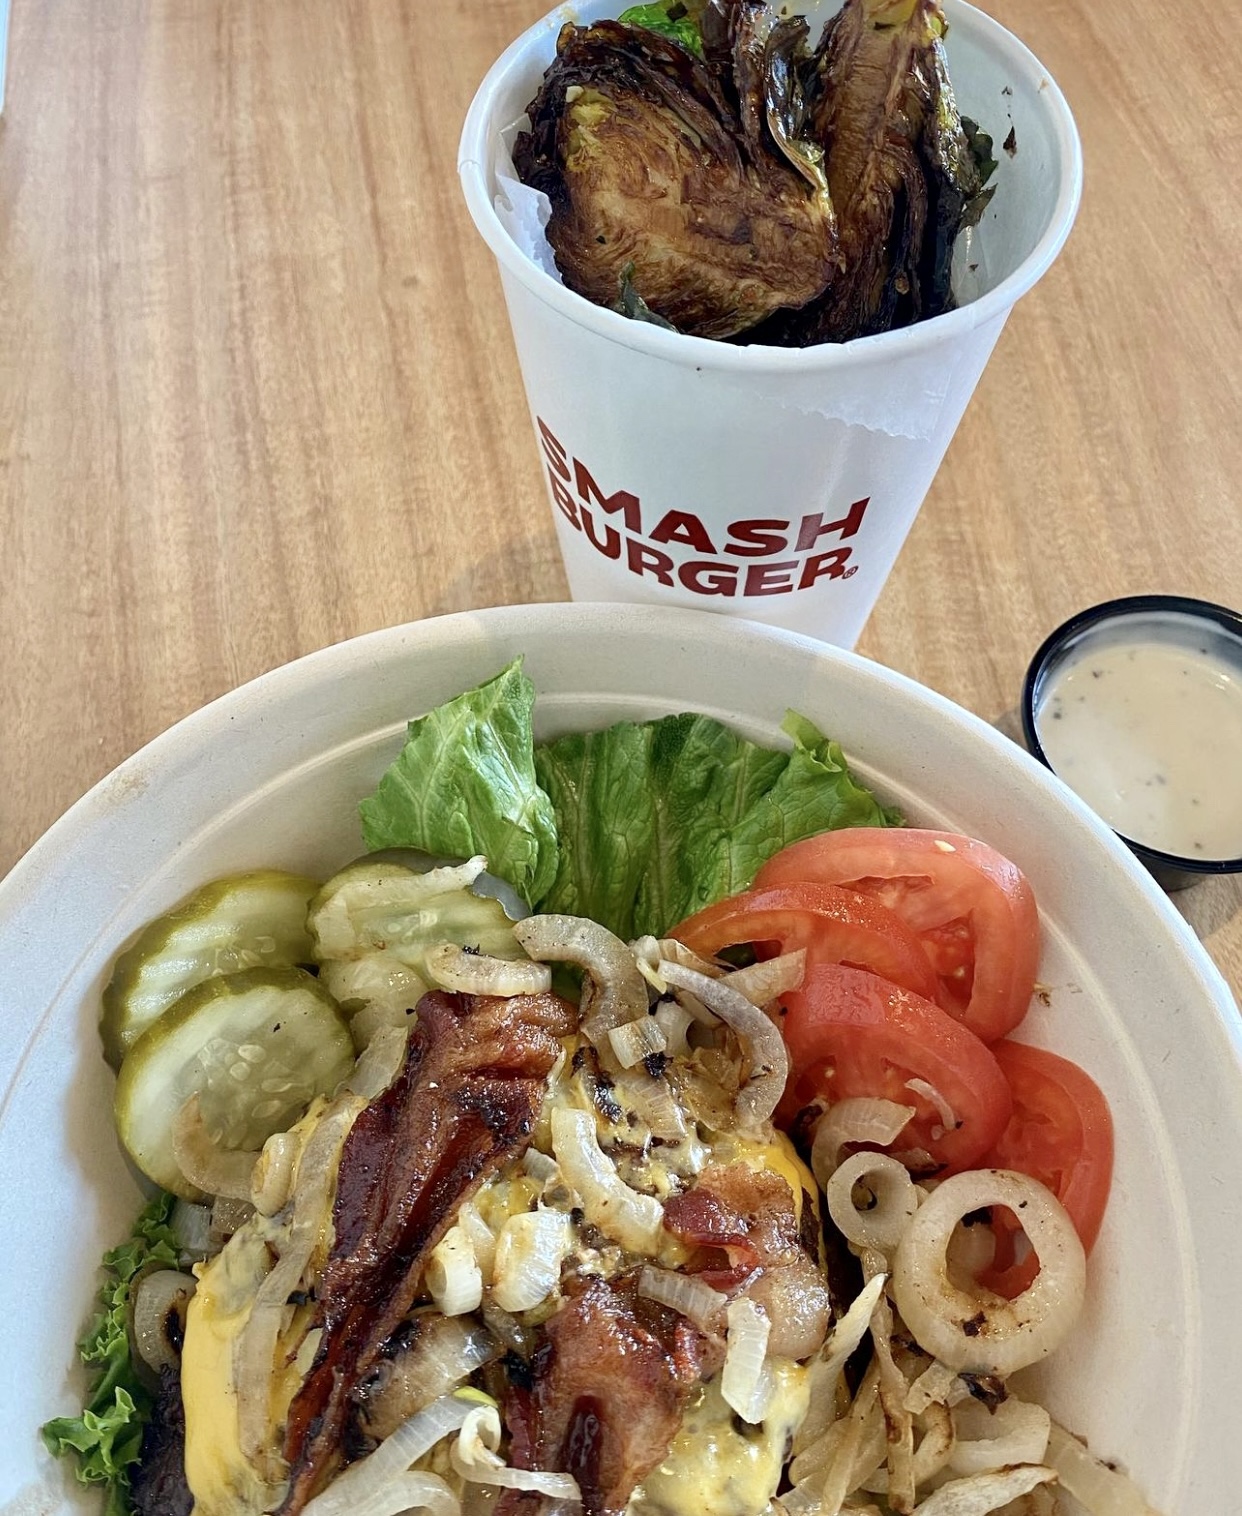 Smash burger bowl, no bun with veggies and lettuce, a side of fried Brussels sprouts with a side of ranch dressing for dipping.